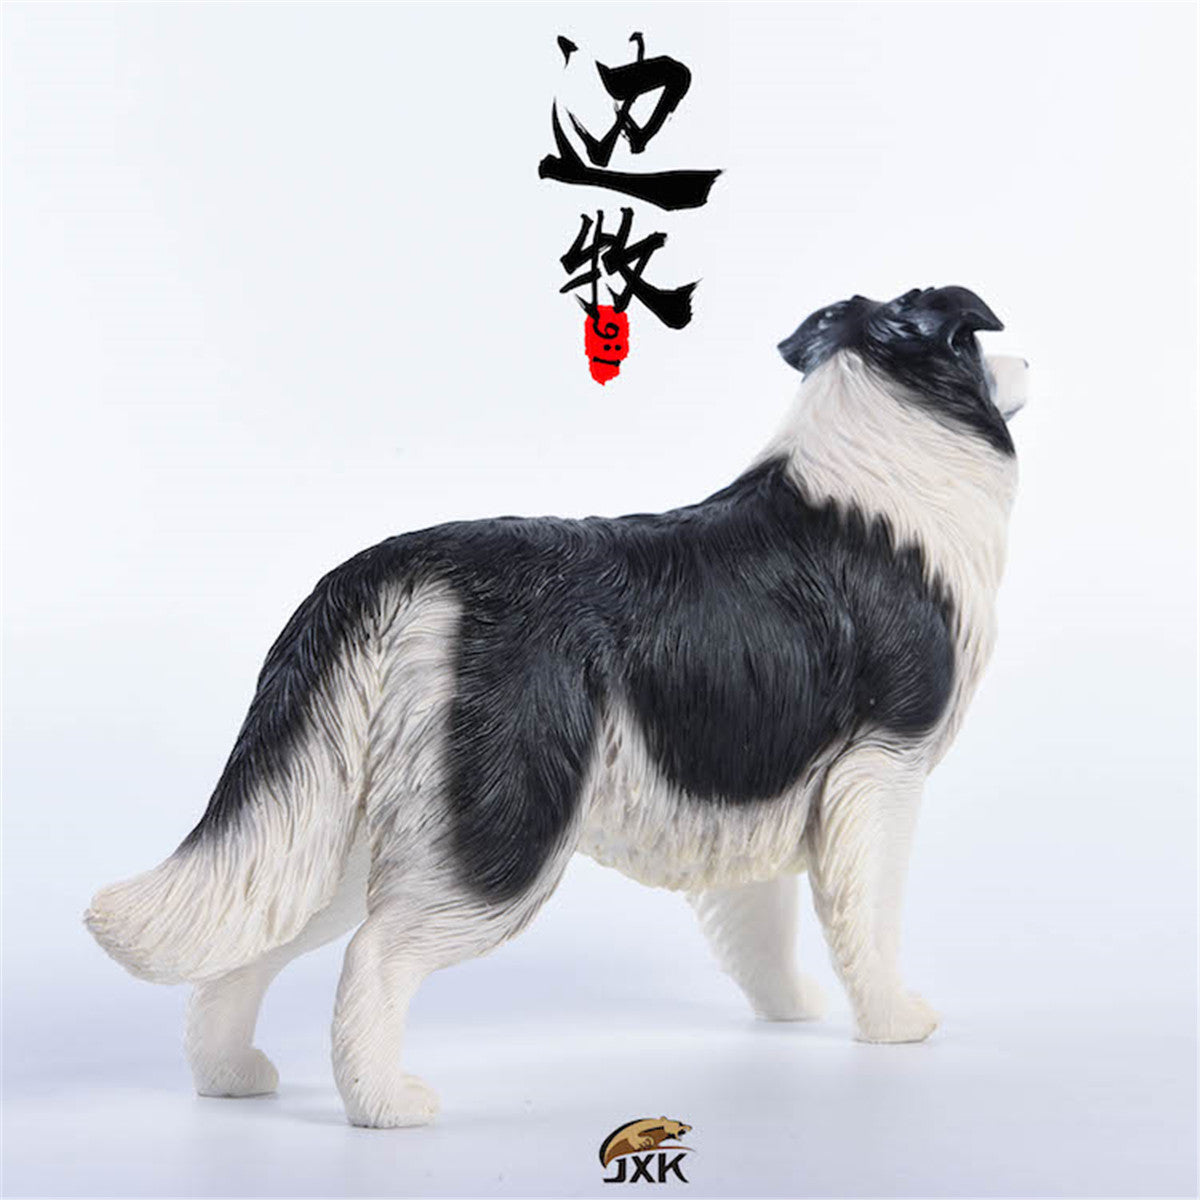  JXK 1/6 Smart Border Collie Dog Pet Figure Canidae Animal Model  Canis Lupus familiaris Realistic Educational Figure Resin Toys Collector  Home Decoration Gift Birthday for Adult (Gray) : Toys & Games